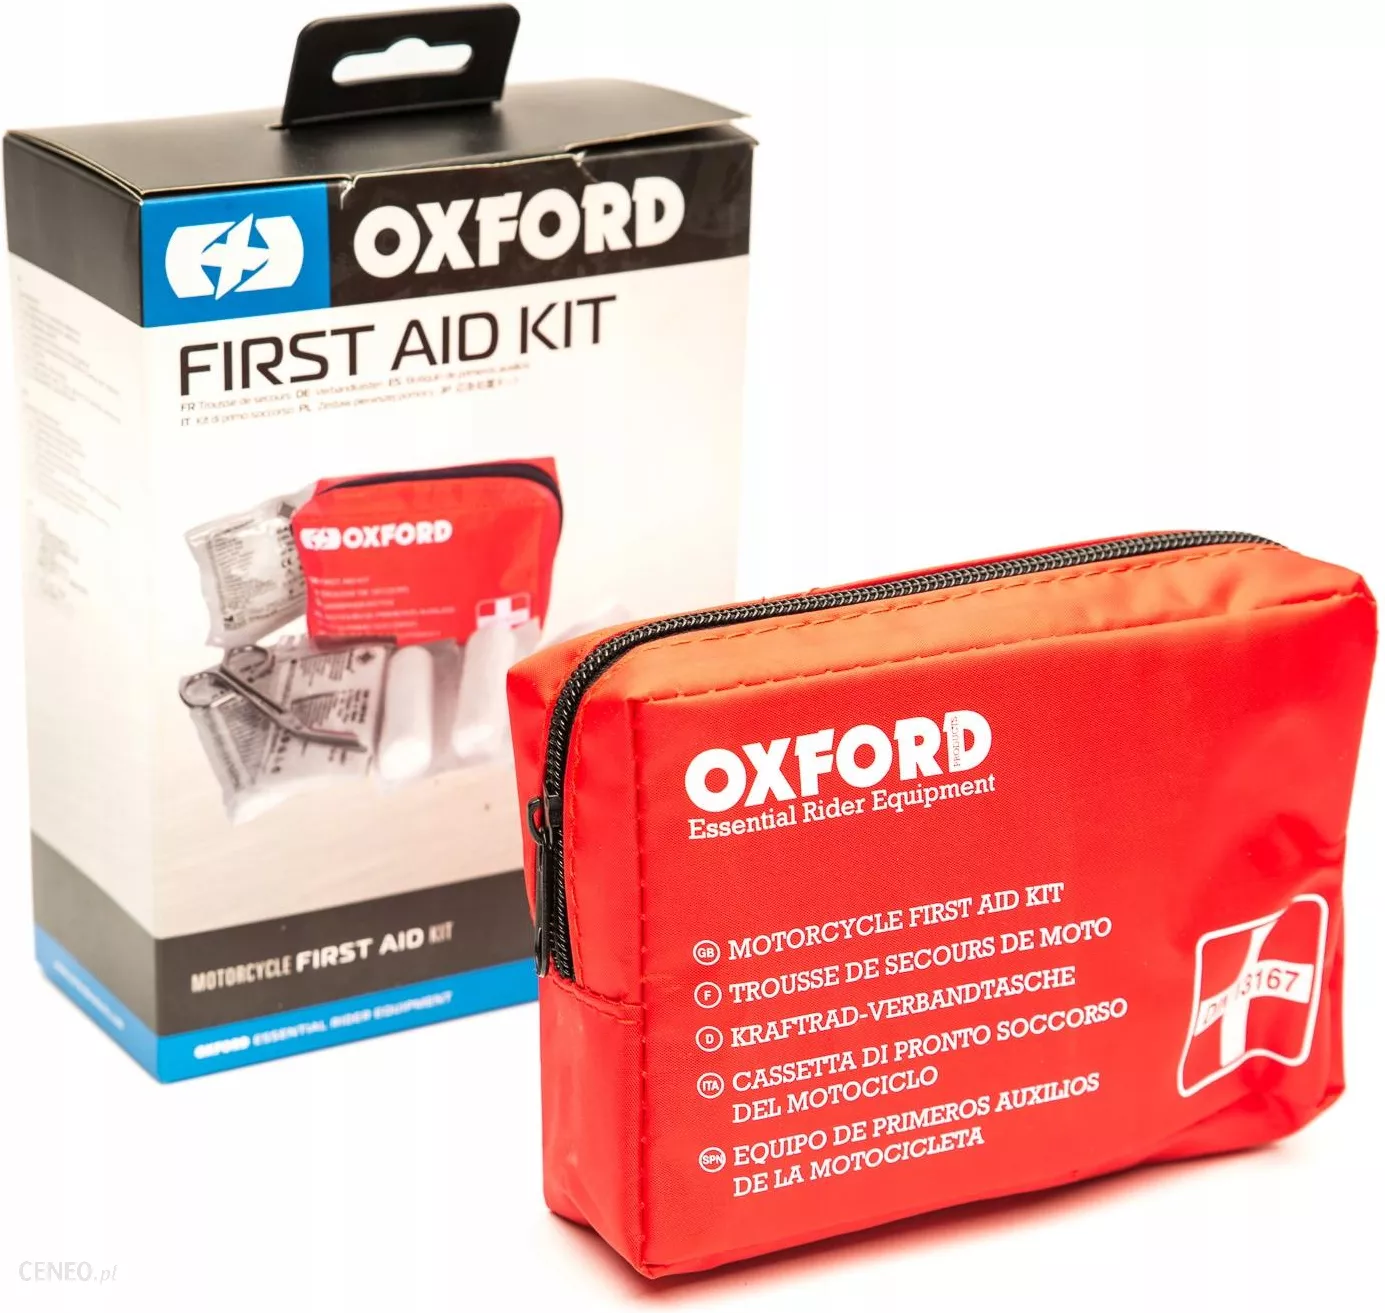 First aid kit OXFORD DIN13167